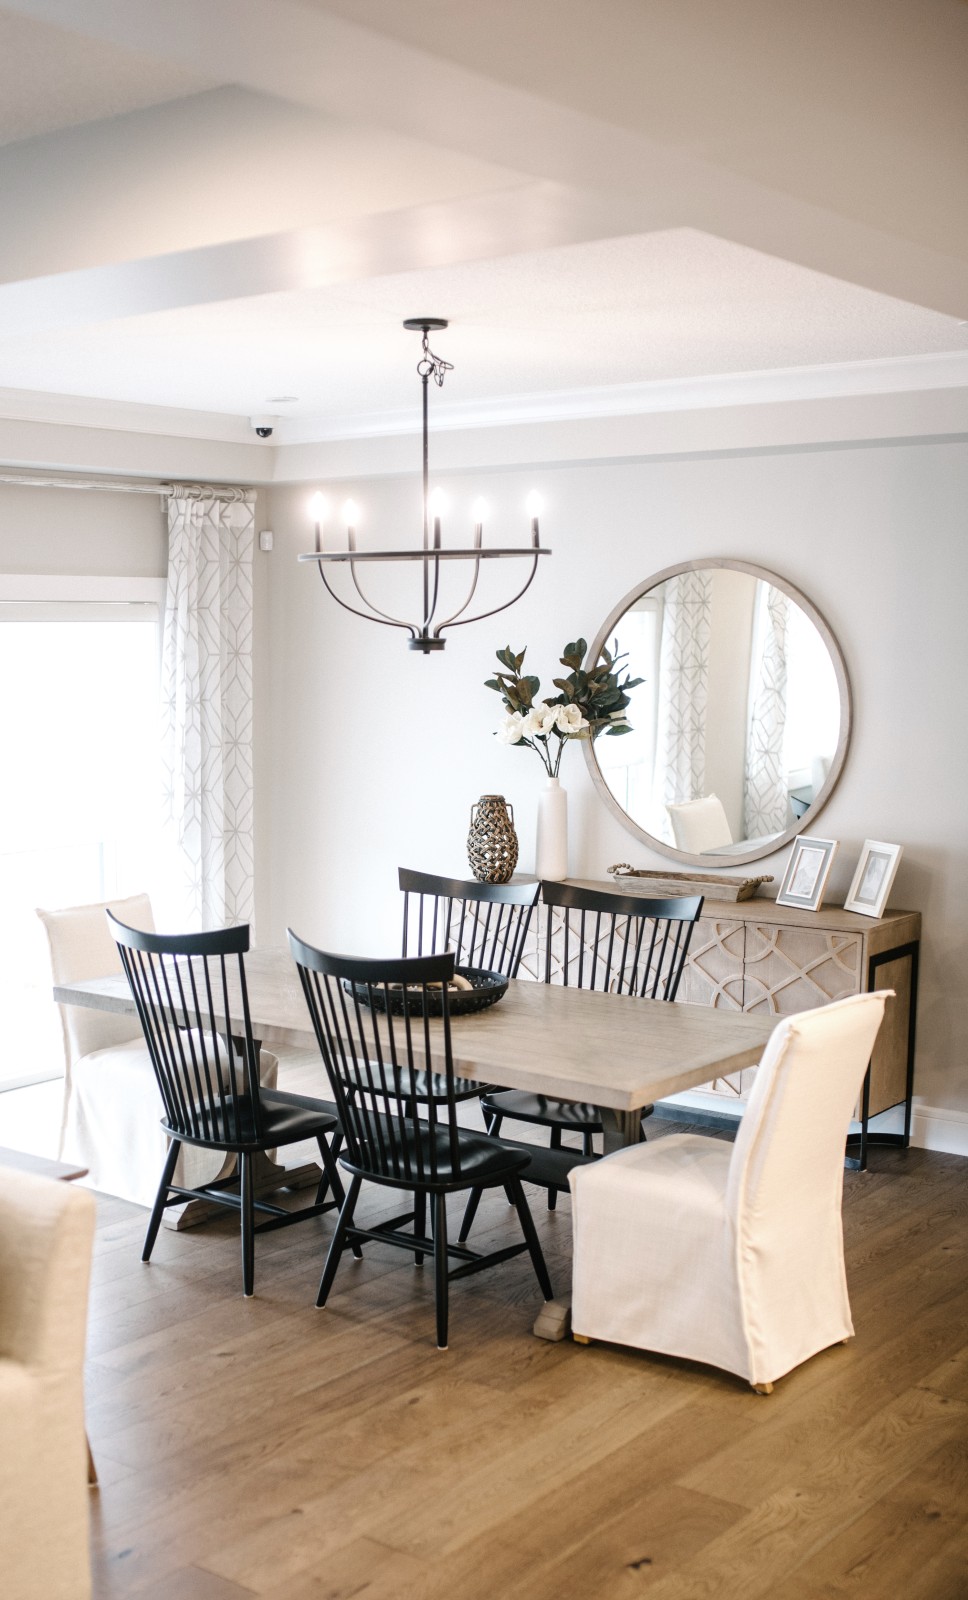 A classic dining room with wood table and black high back wood chairs with white covered chairs at the heads of the table, classic sideboard and oversized round mirror hung above on the wall